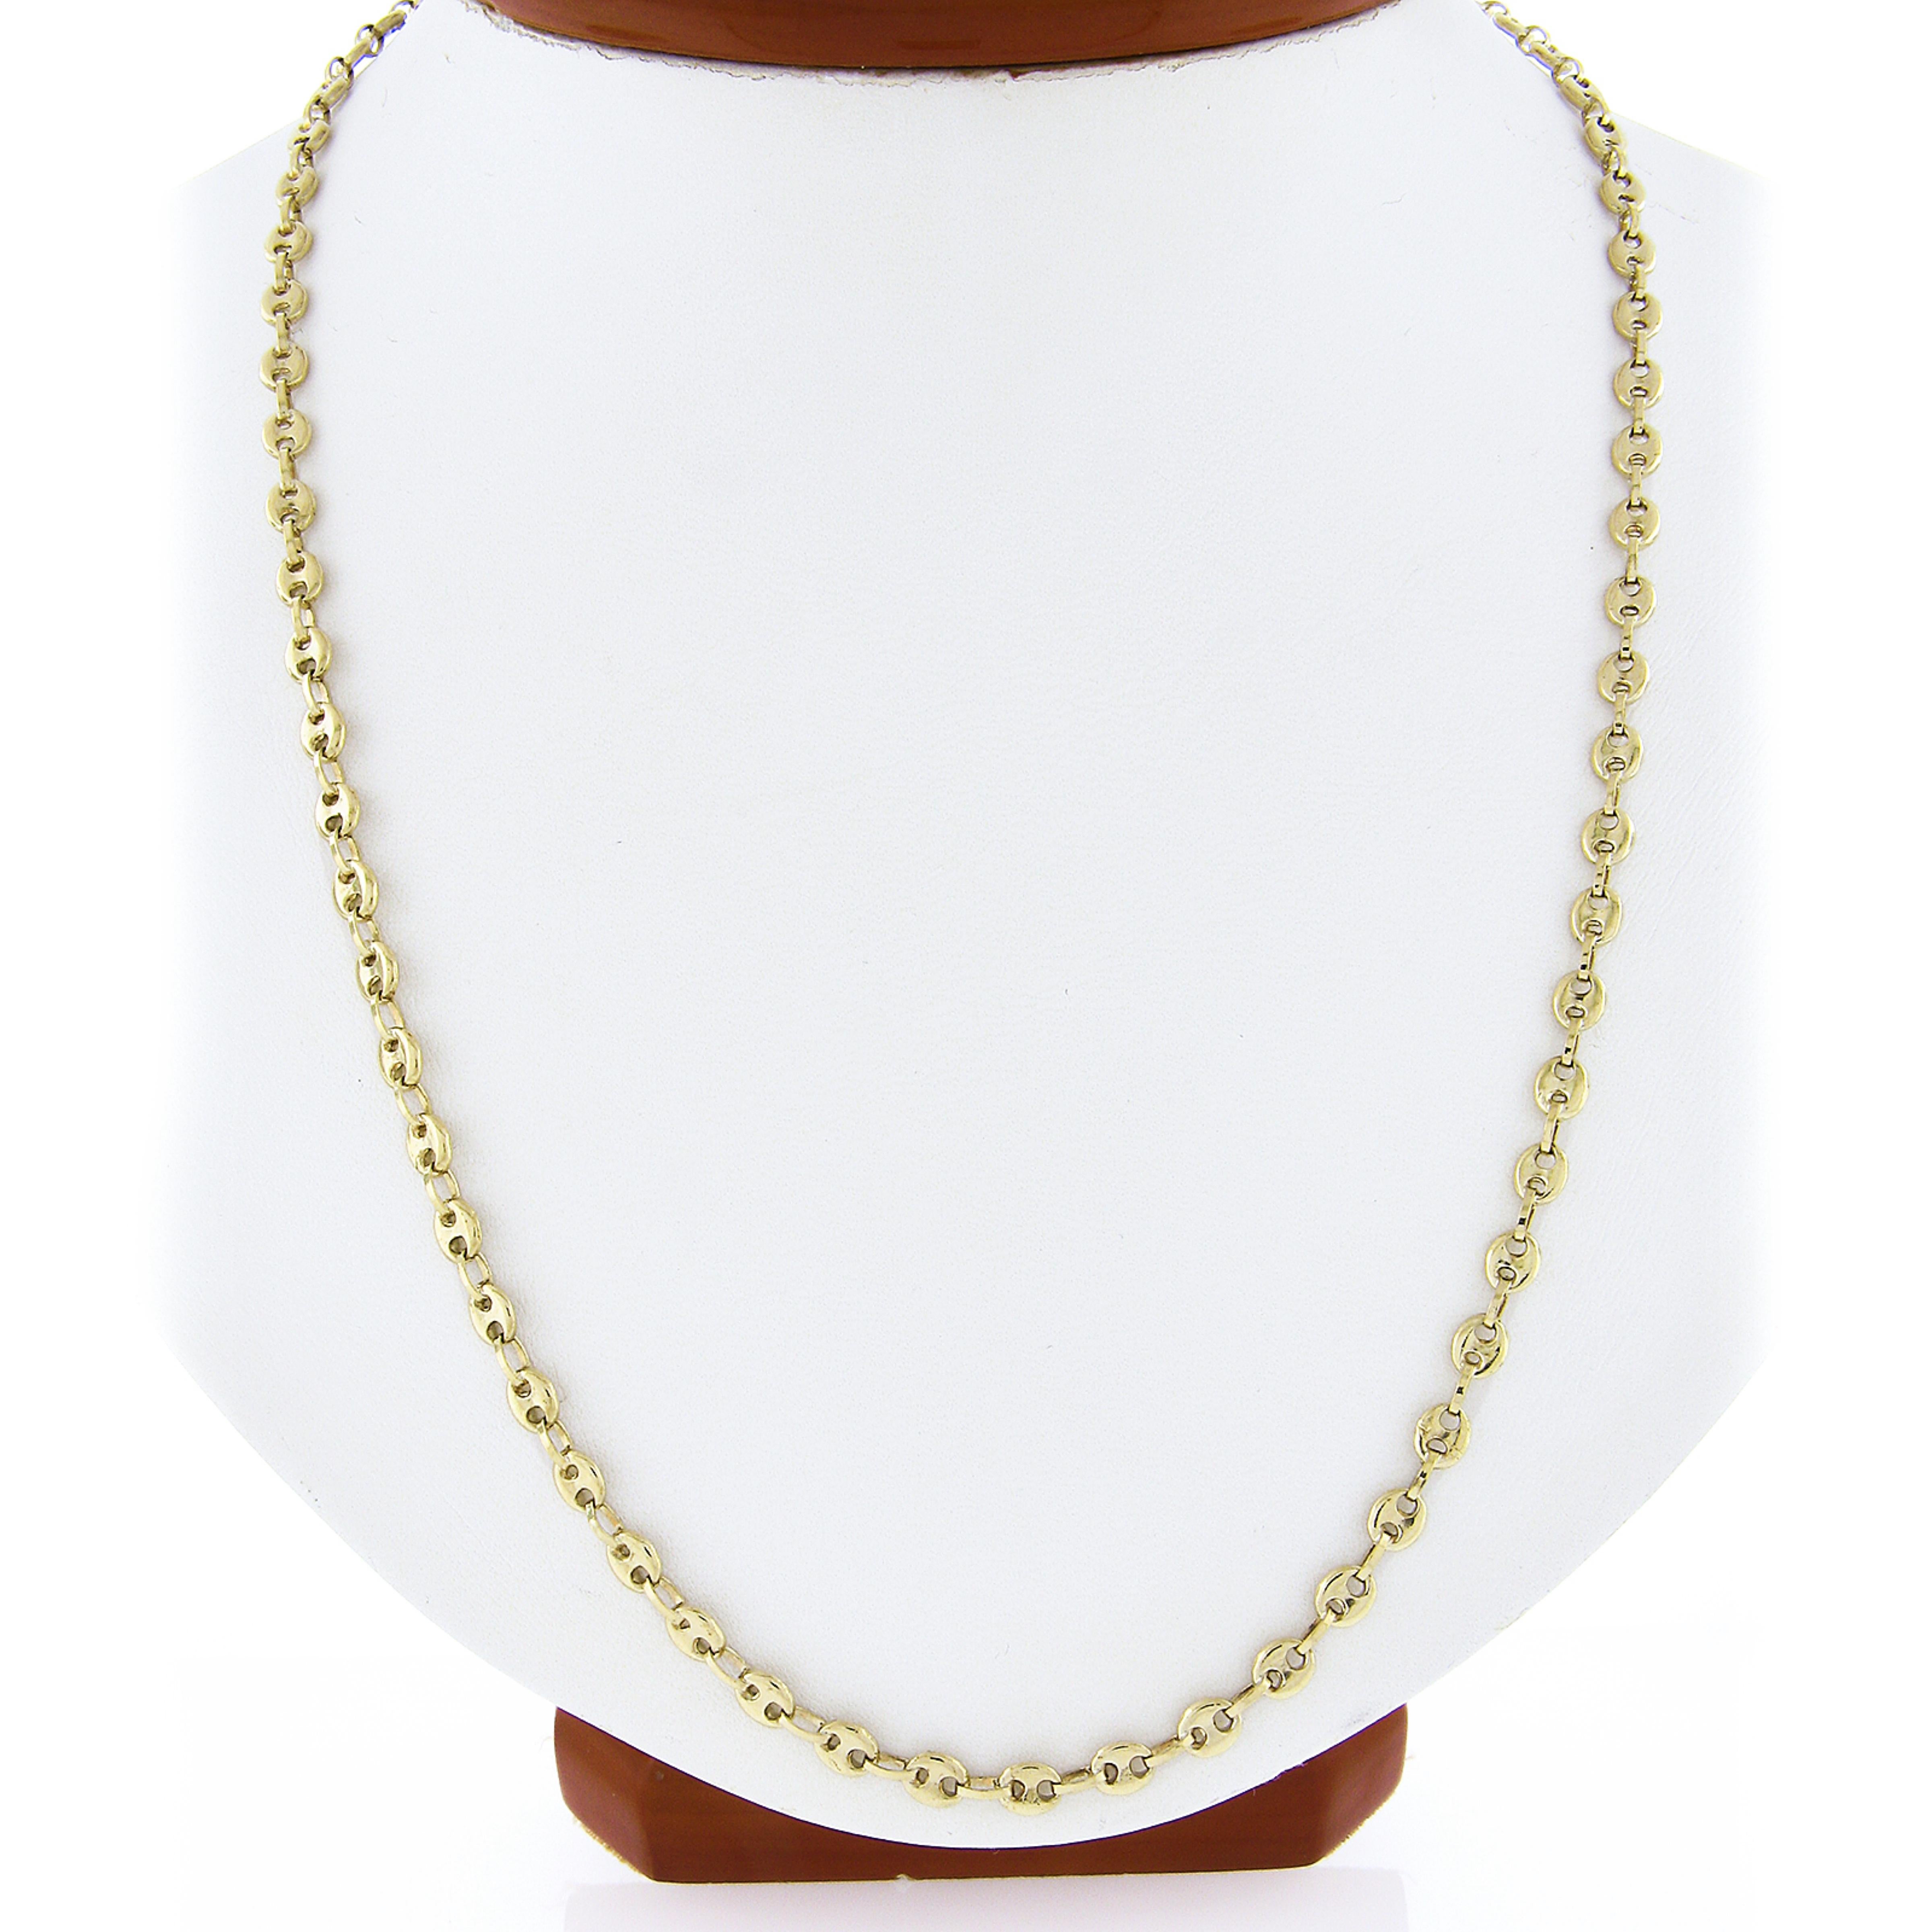 Here we have very well made vintage unisex mariner link chain necklace that was crafted in from solid 18k yellow gold. The links have a wonderful puffed & polished finish throughout granting a super attractive, and bold look on this piece. This 28.5